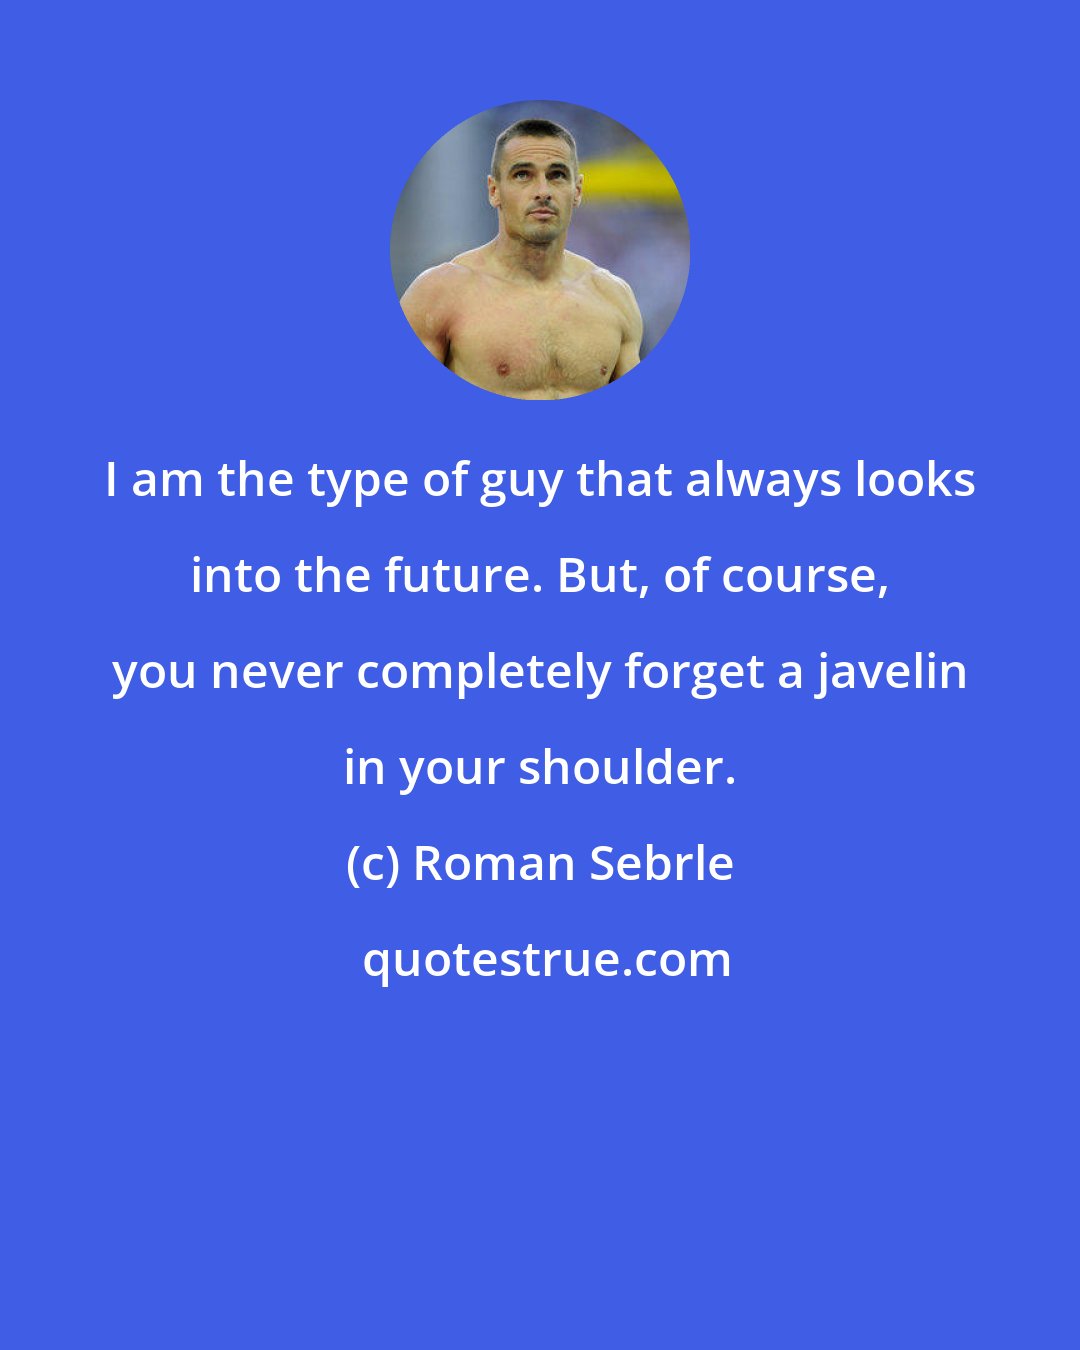 Roman Sebrle: I am the type of guy that always looks into the future. But, of course, you never completely forget a javelin in your shoulder.